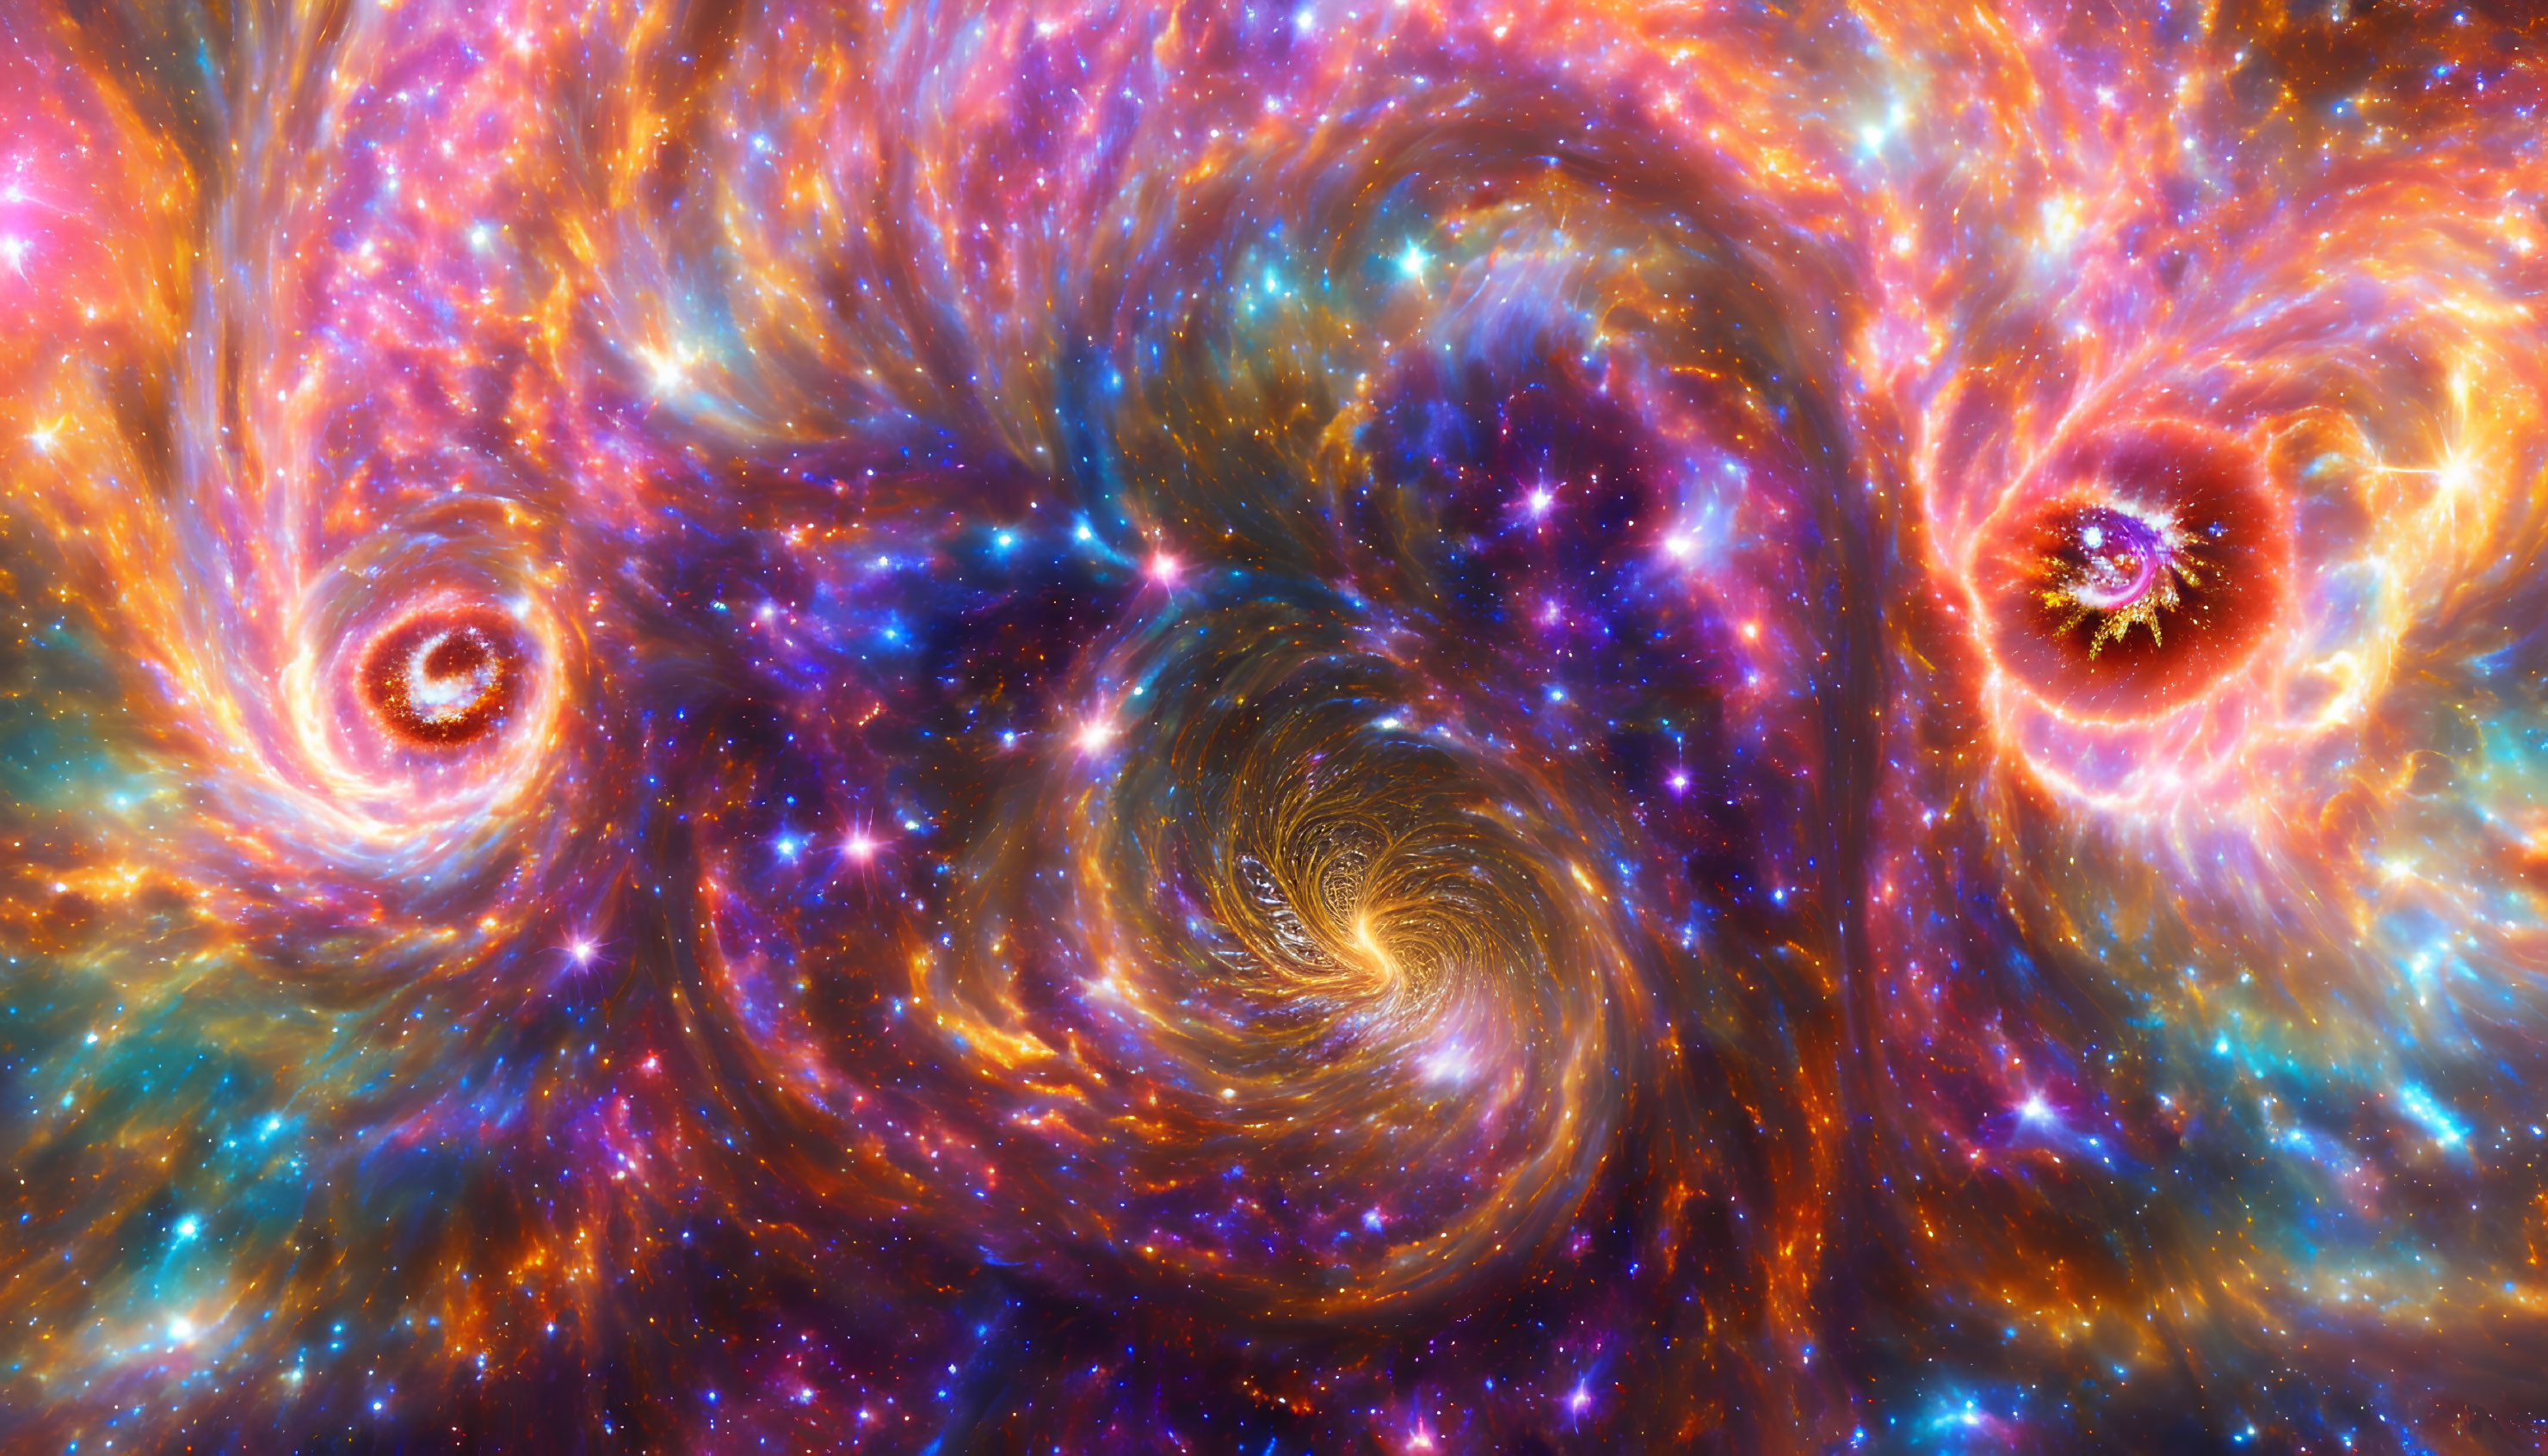 Colorful swirling galaxies and stars in vibrant space scene.